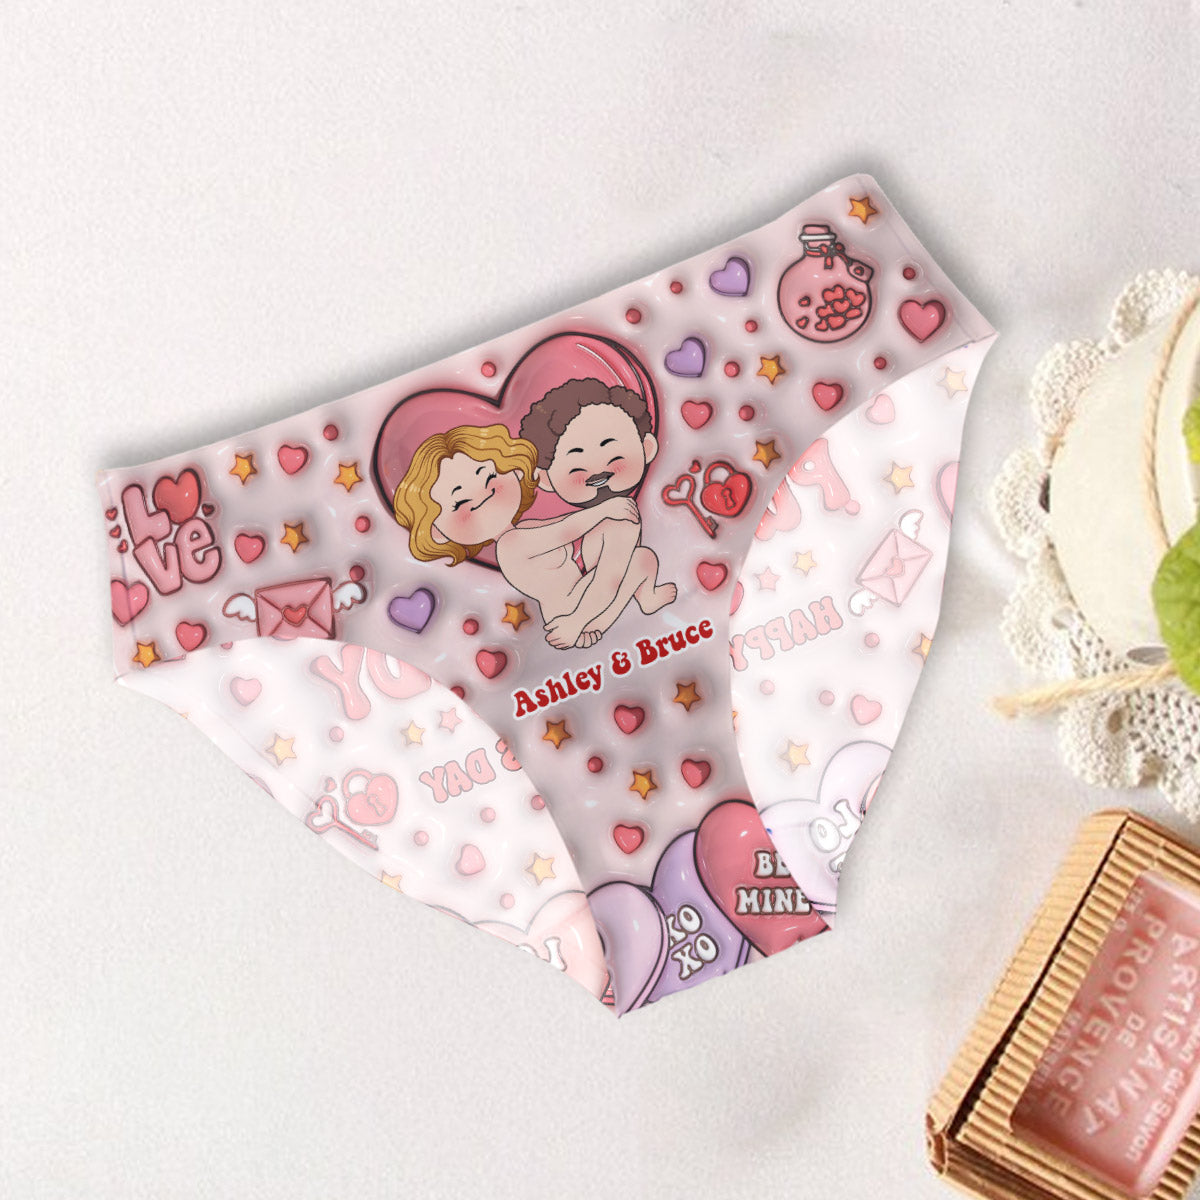 Get Your WIlly Ready - Personalized Couple Women Briefs & Men Boxer Briefs